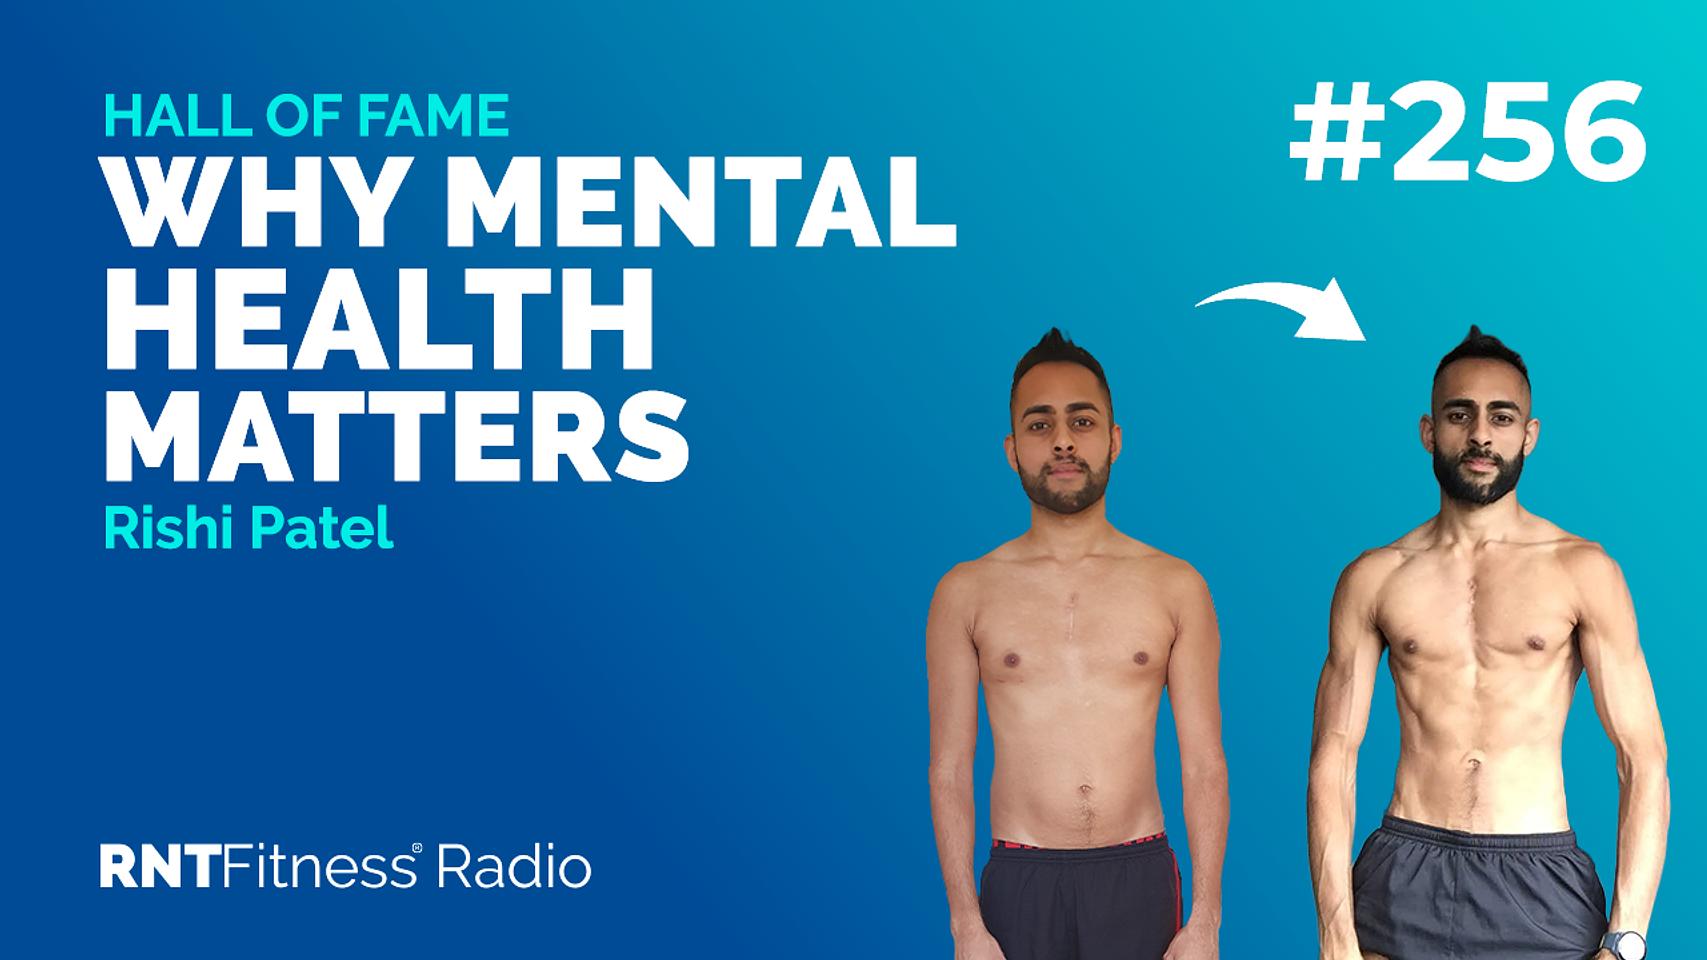 Ep. 256 Hall of Fame | Rishi Patel - Why Mental Health Matters